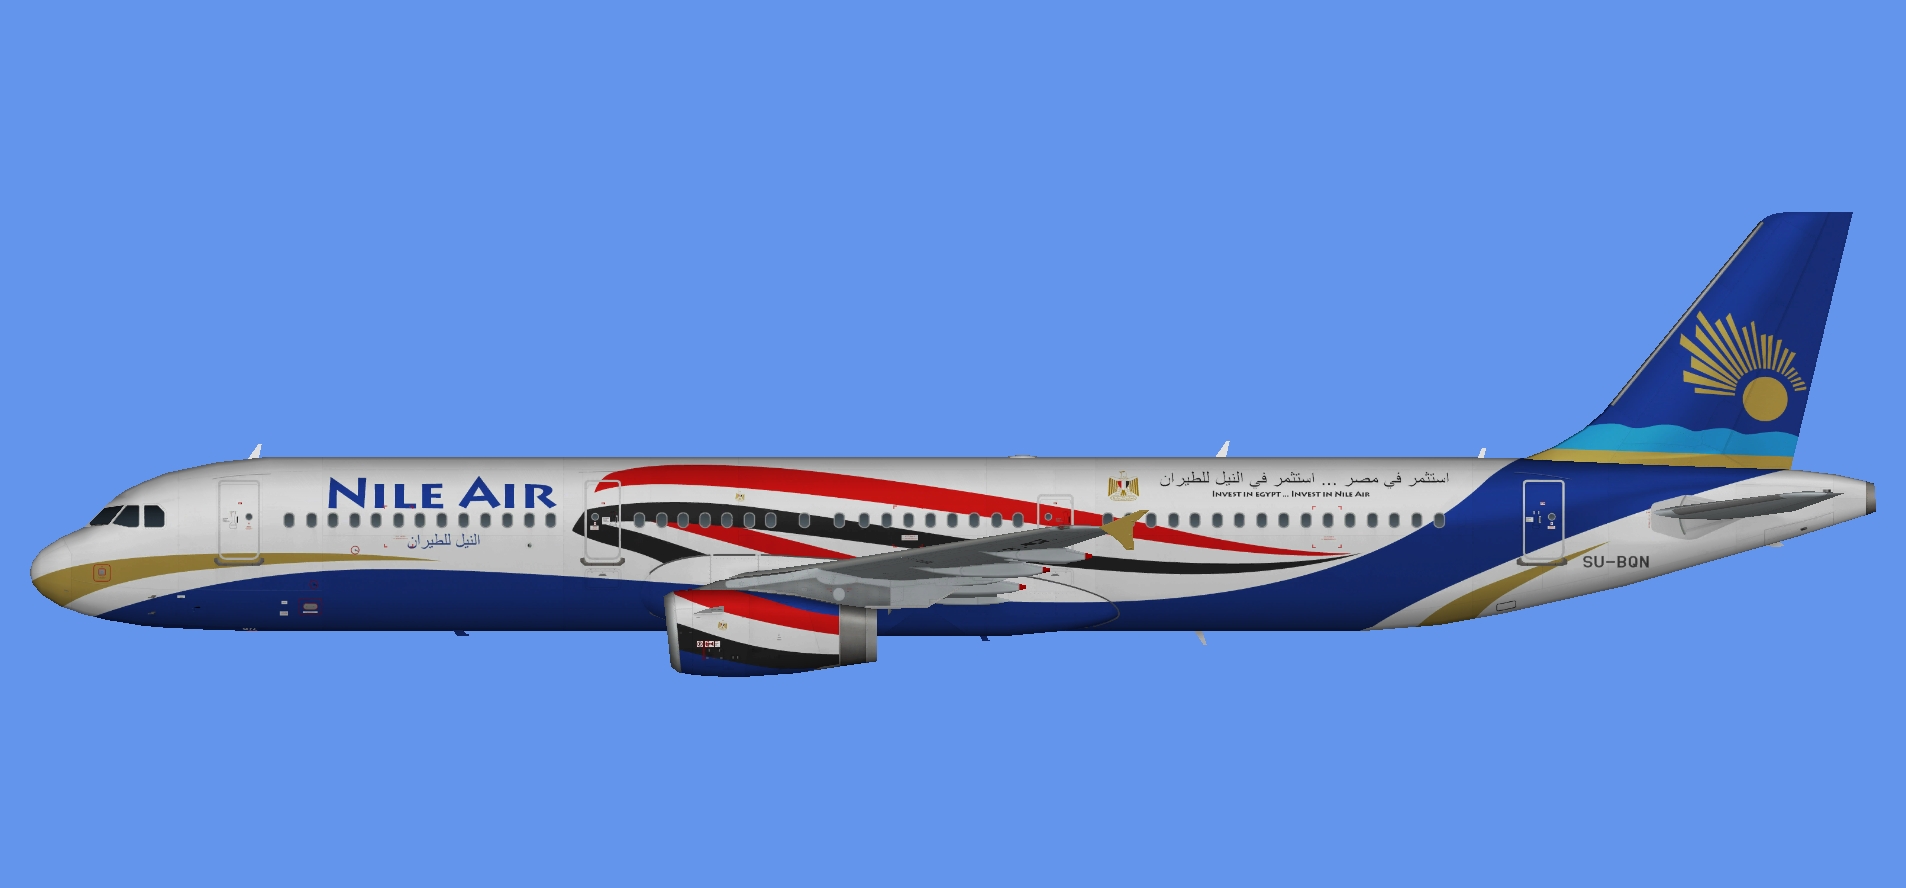 Nile Air A321 'Invest in Egypt'